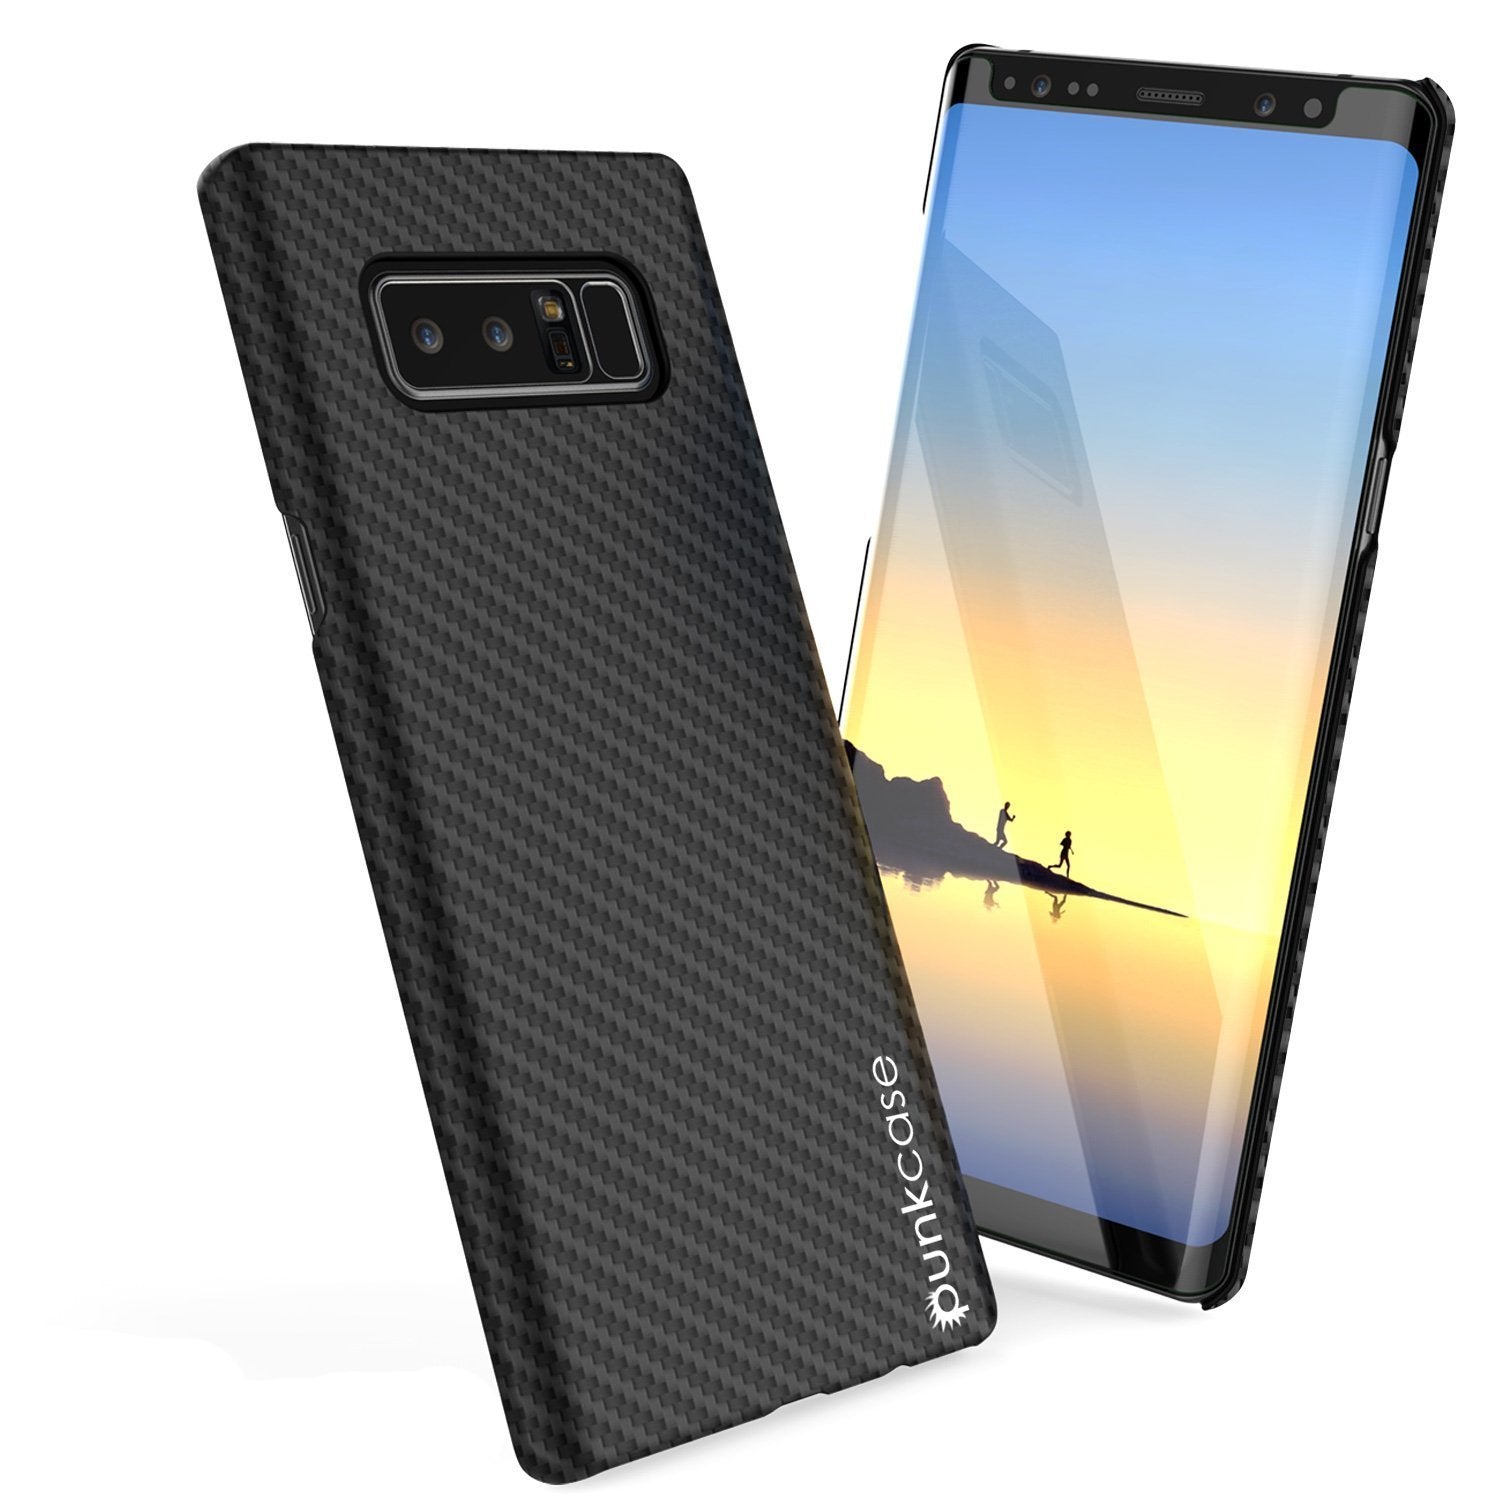 Galaxy Note 8 Case, Punkcase CarbonShield, Heavy Duty & Ultra Thin 2 Piece Dual Layer PU Leather Cover [shockproof] with Screen Protector [jet black]